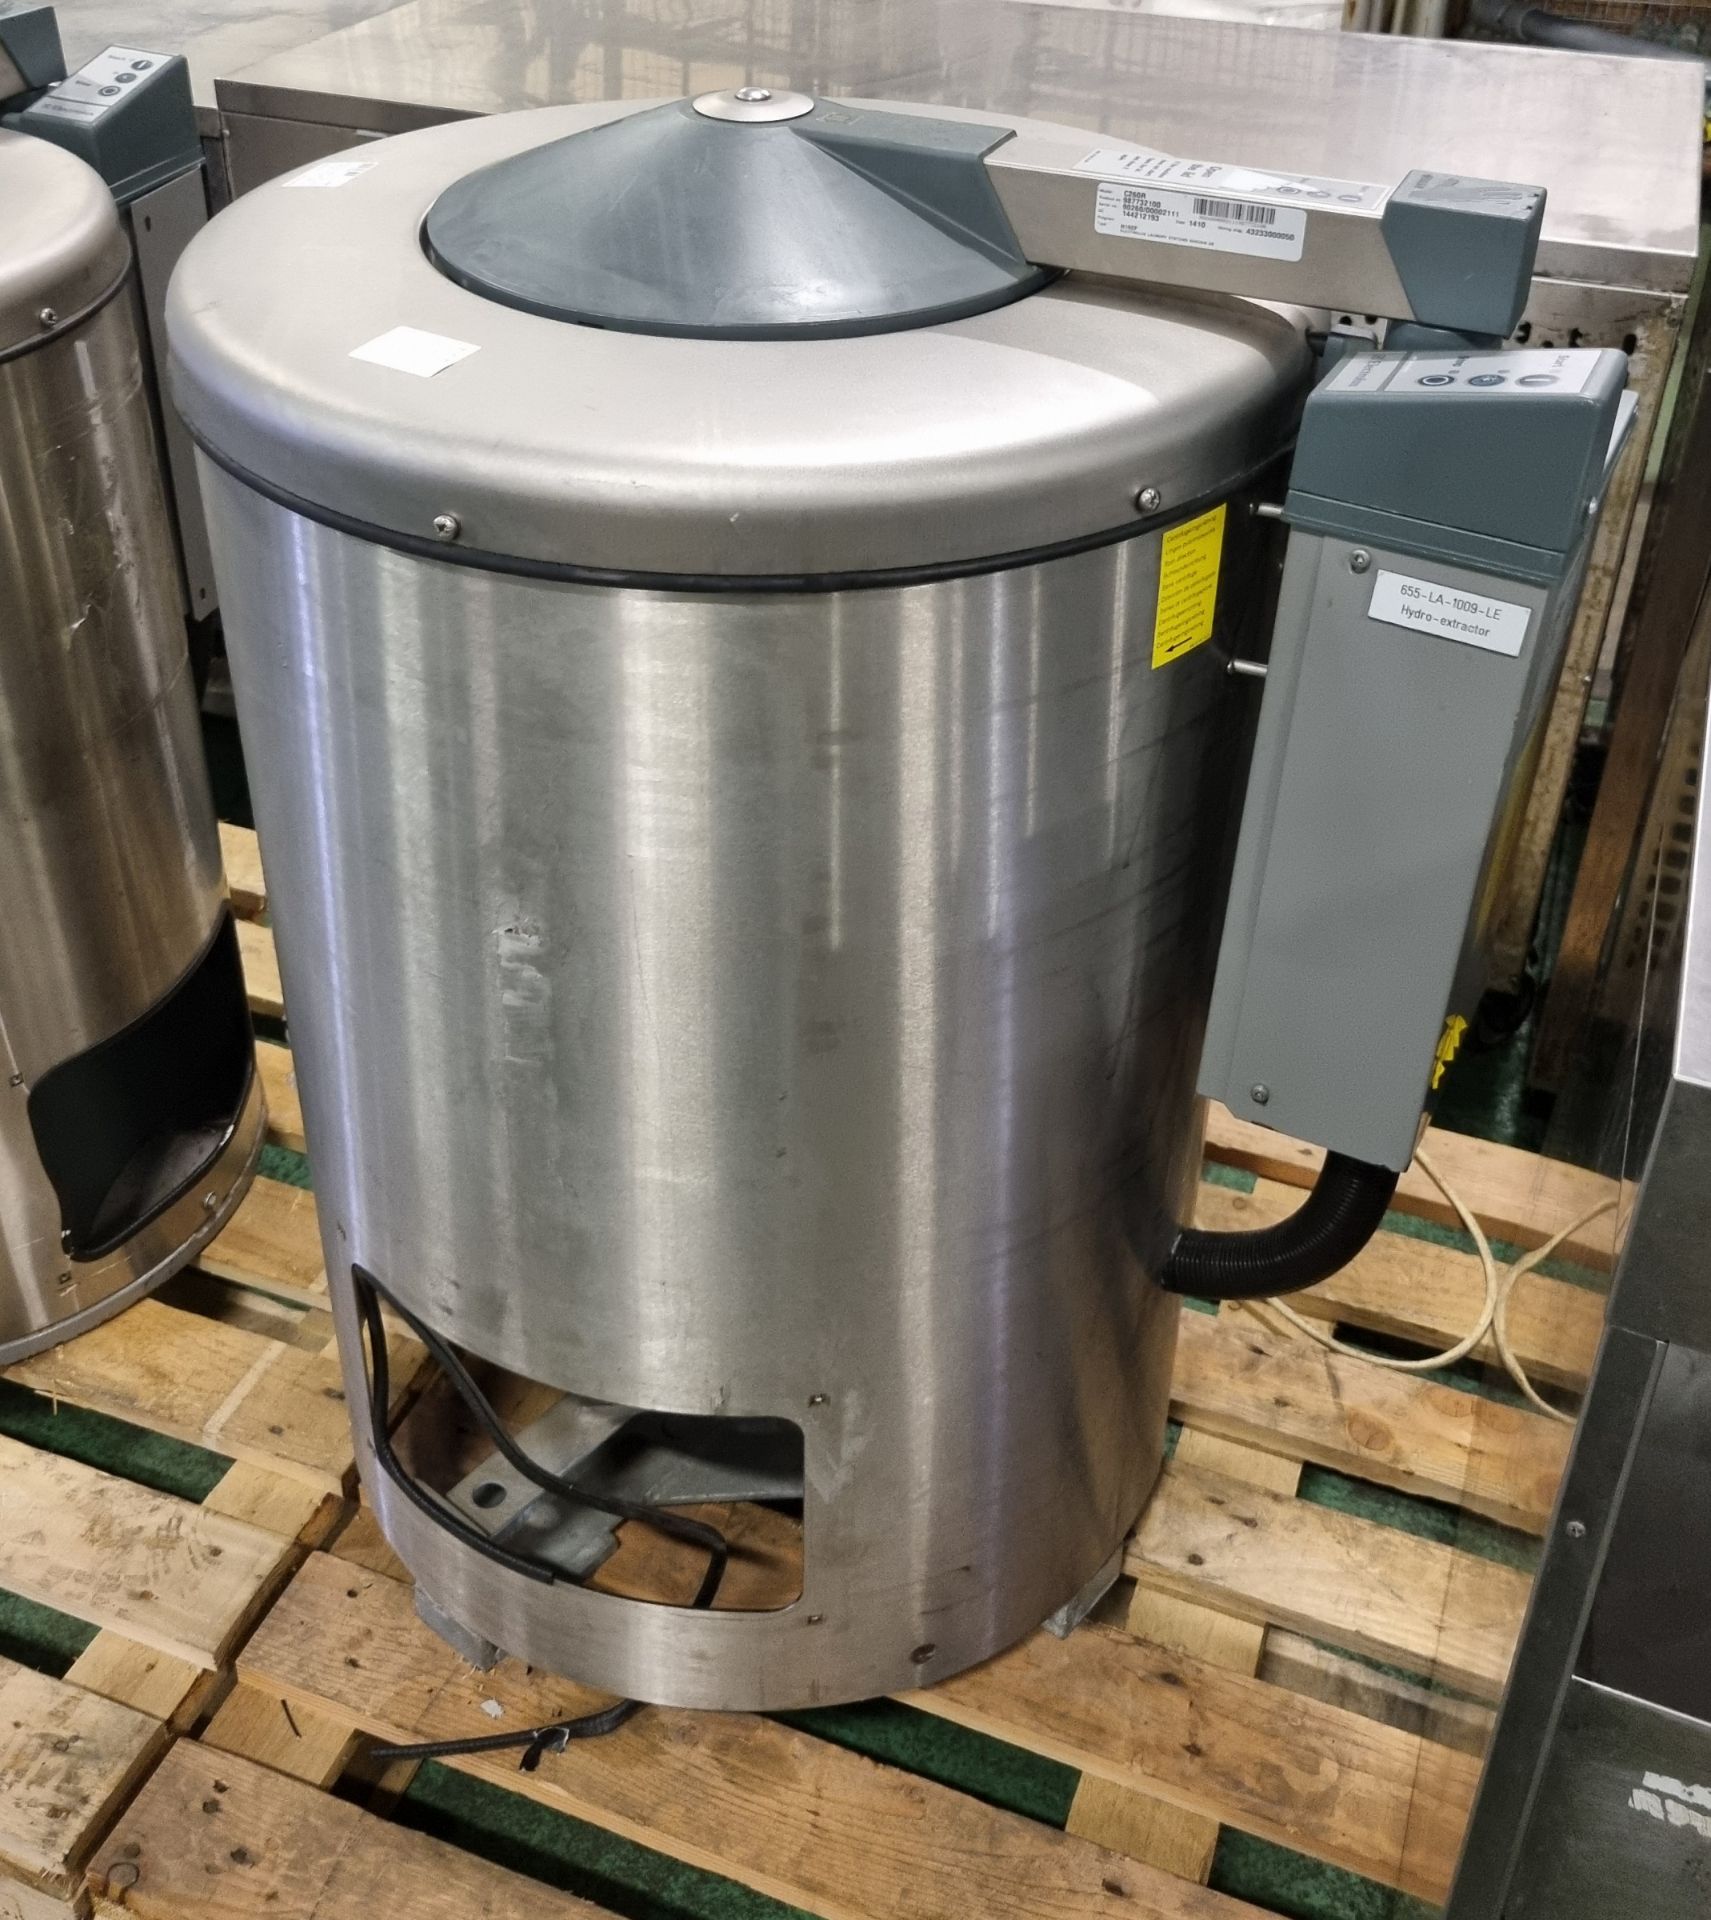 Electrolux C260R 12kg Hydro extractor spin dryer (Missing lower side cover) - 415V - Image 3 of 6